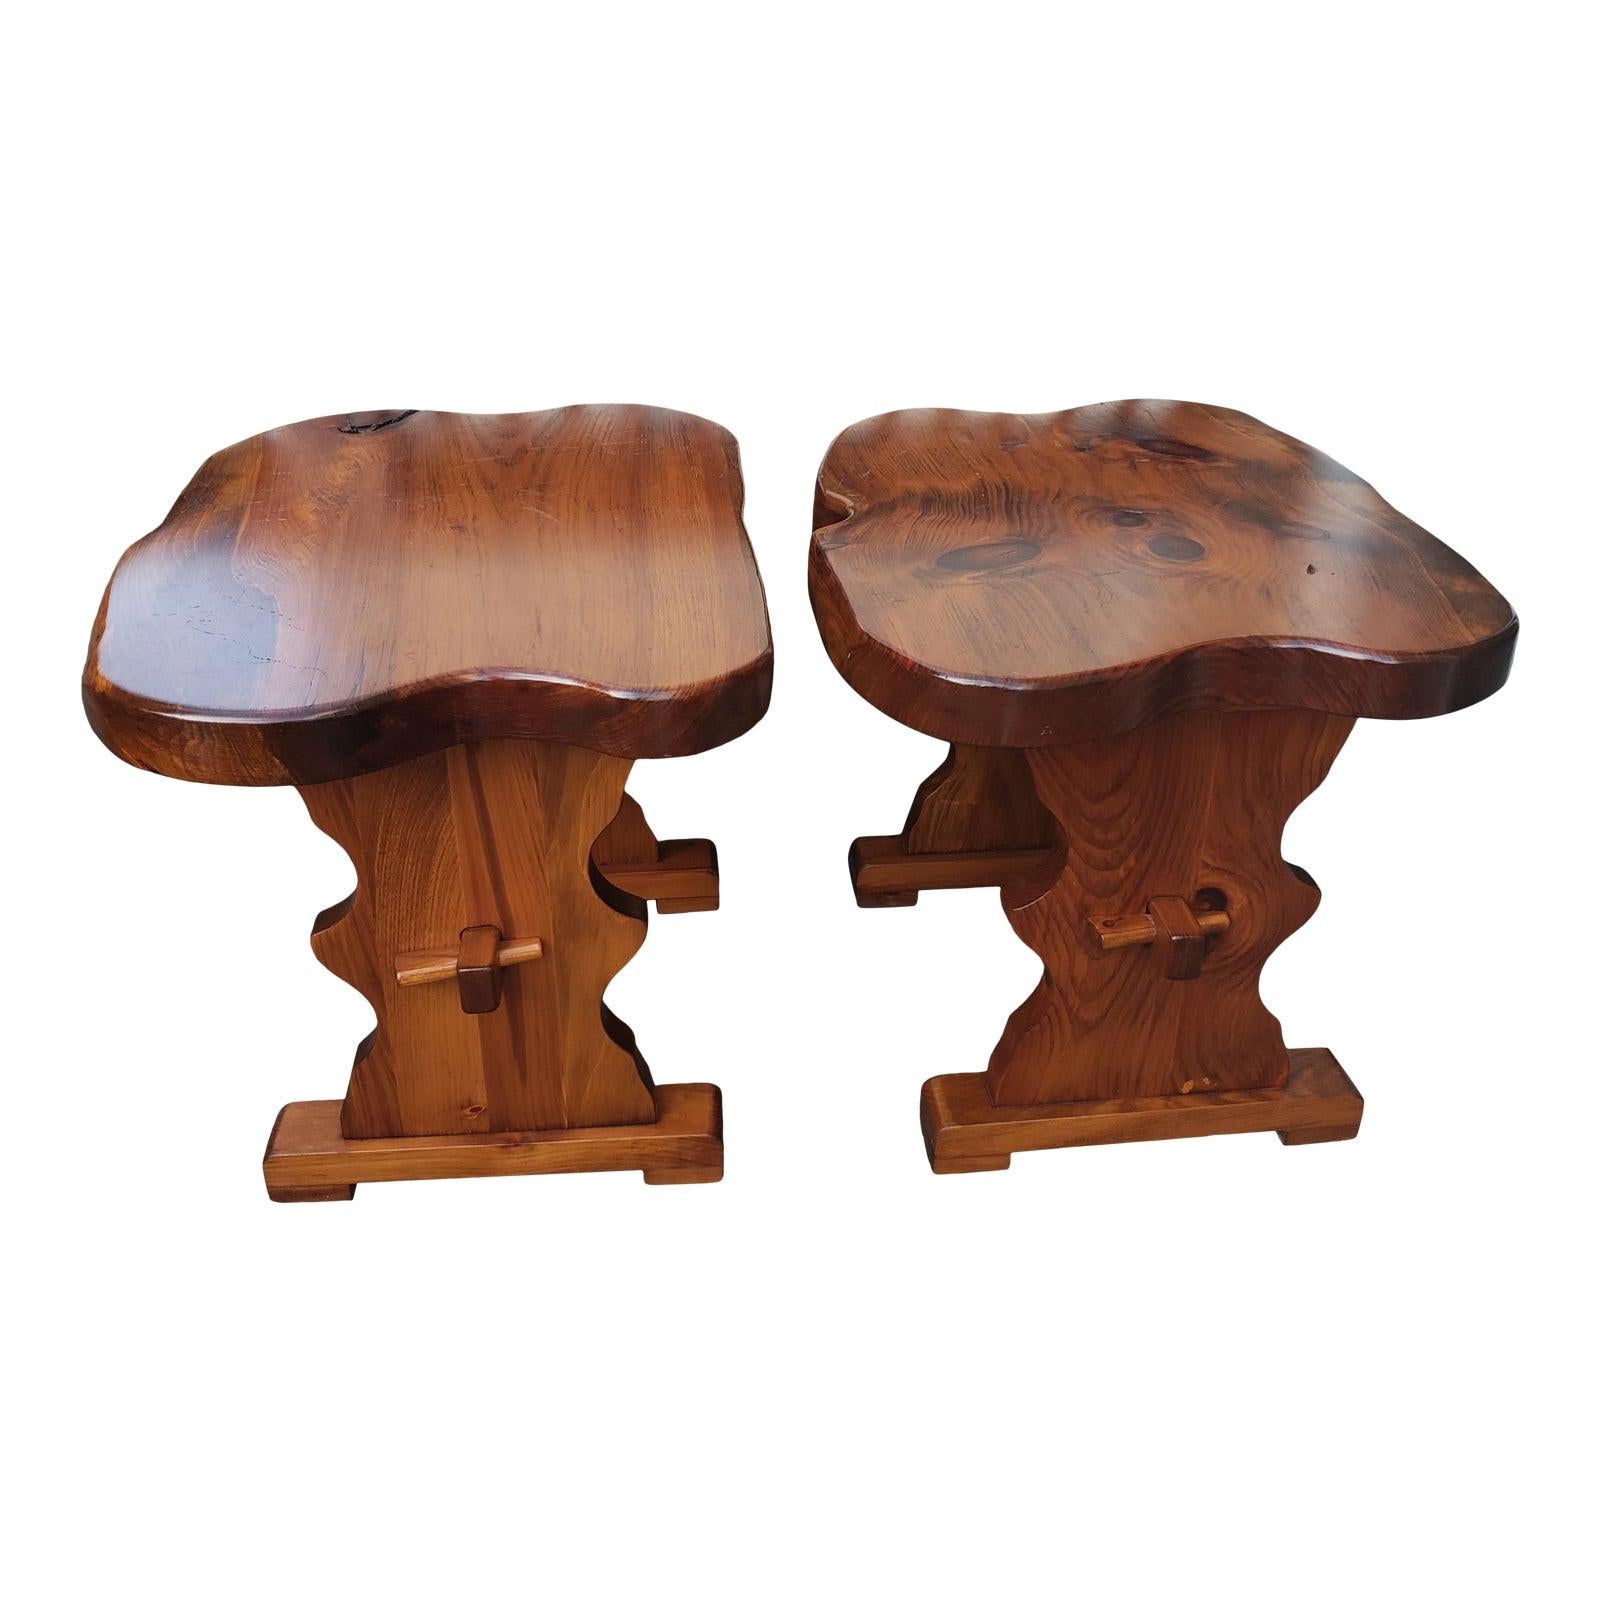 1980s Handcrafted Polished Walnut Pine Wood Slabs Trestle Side Tables, a Pair For Sale